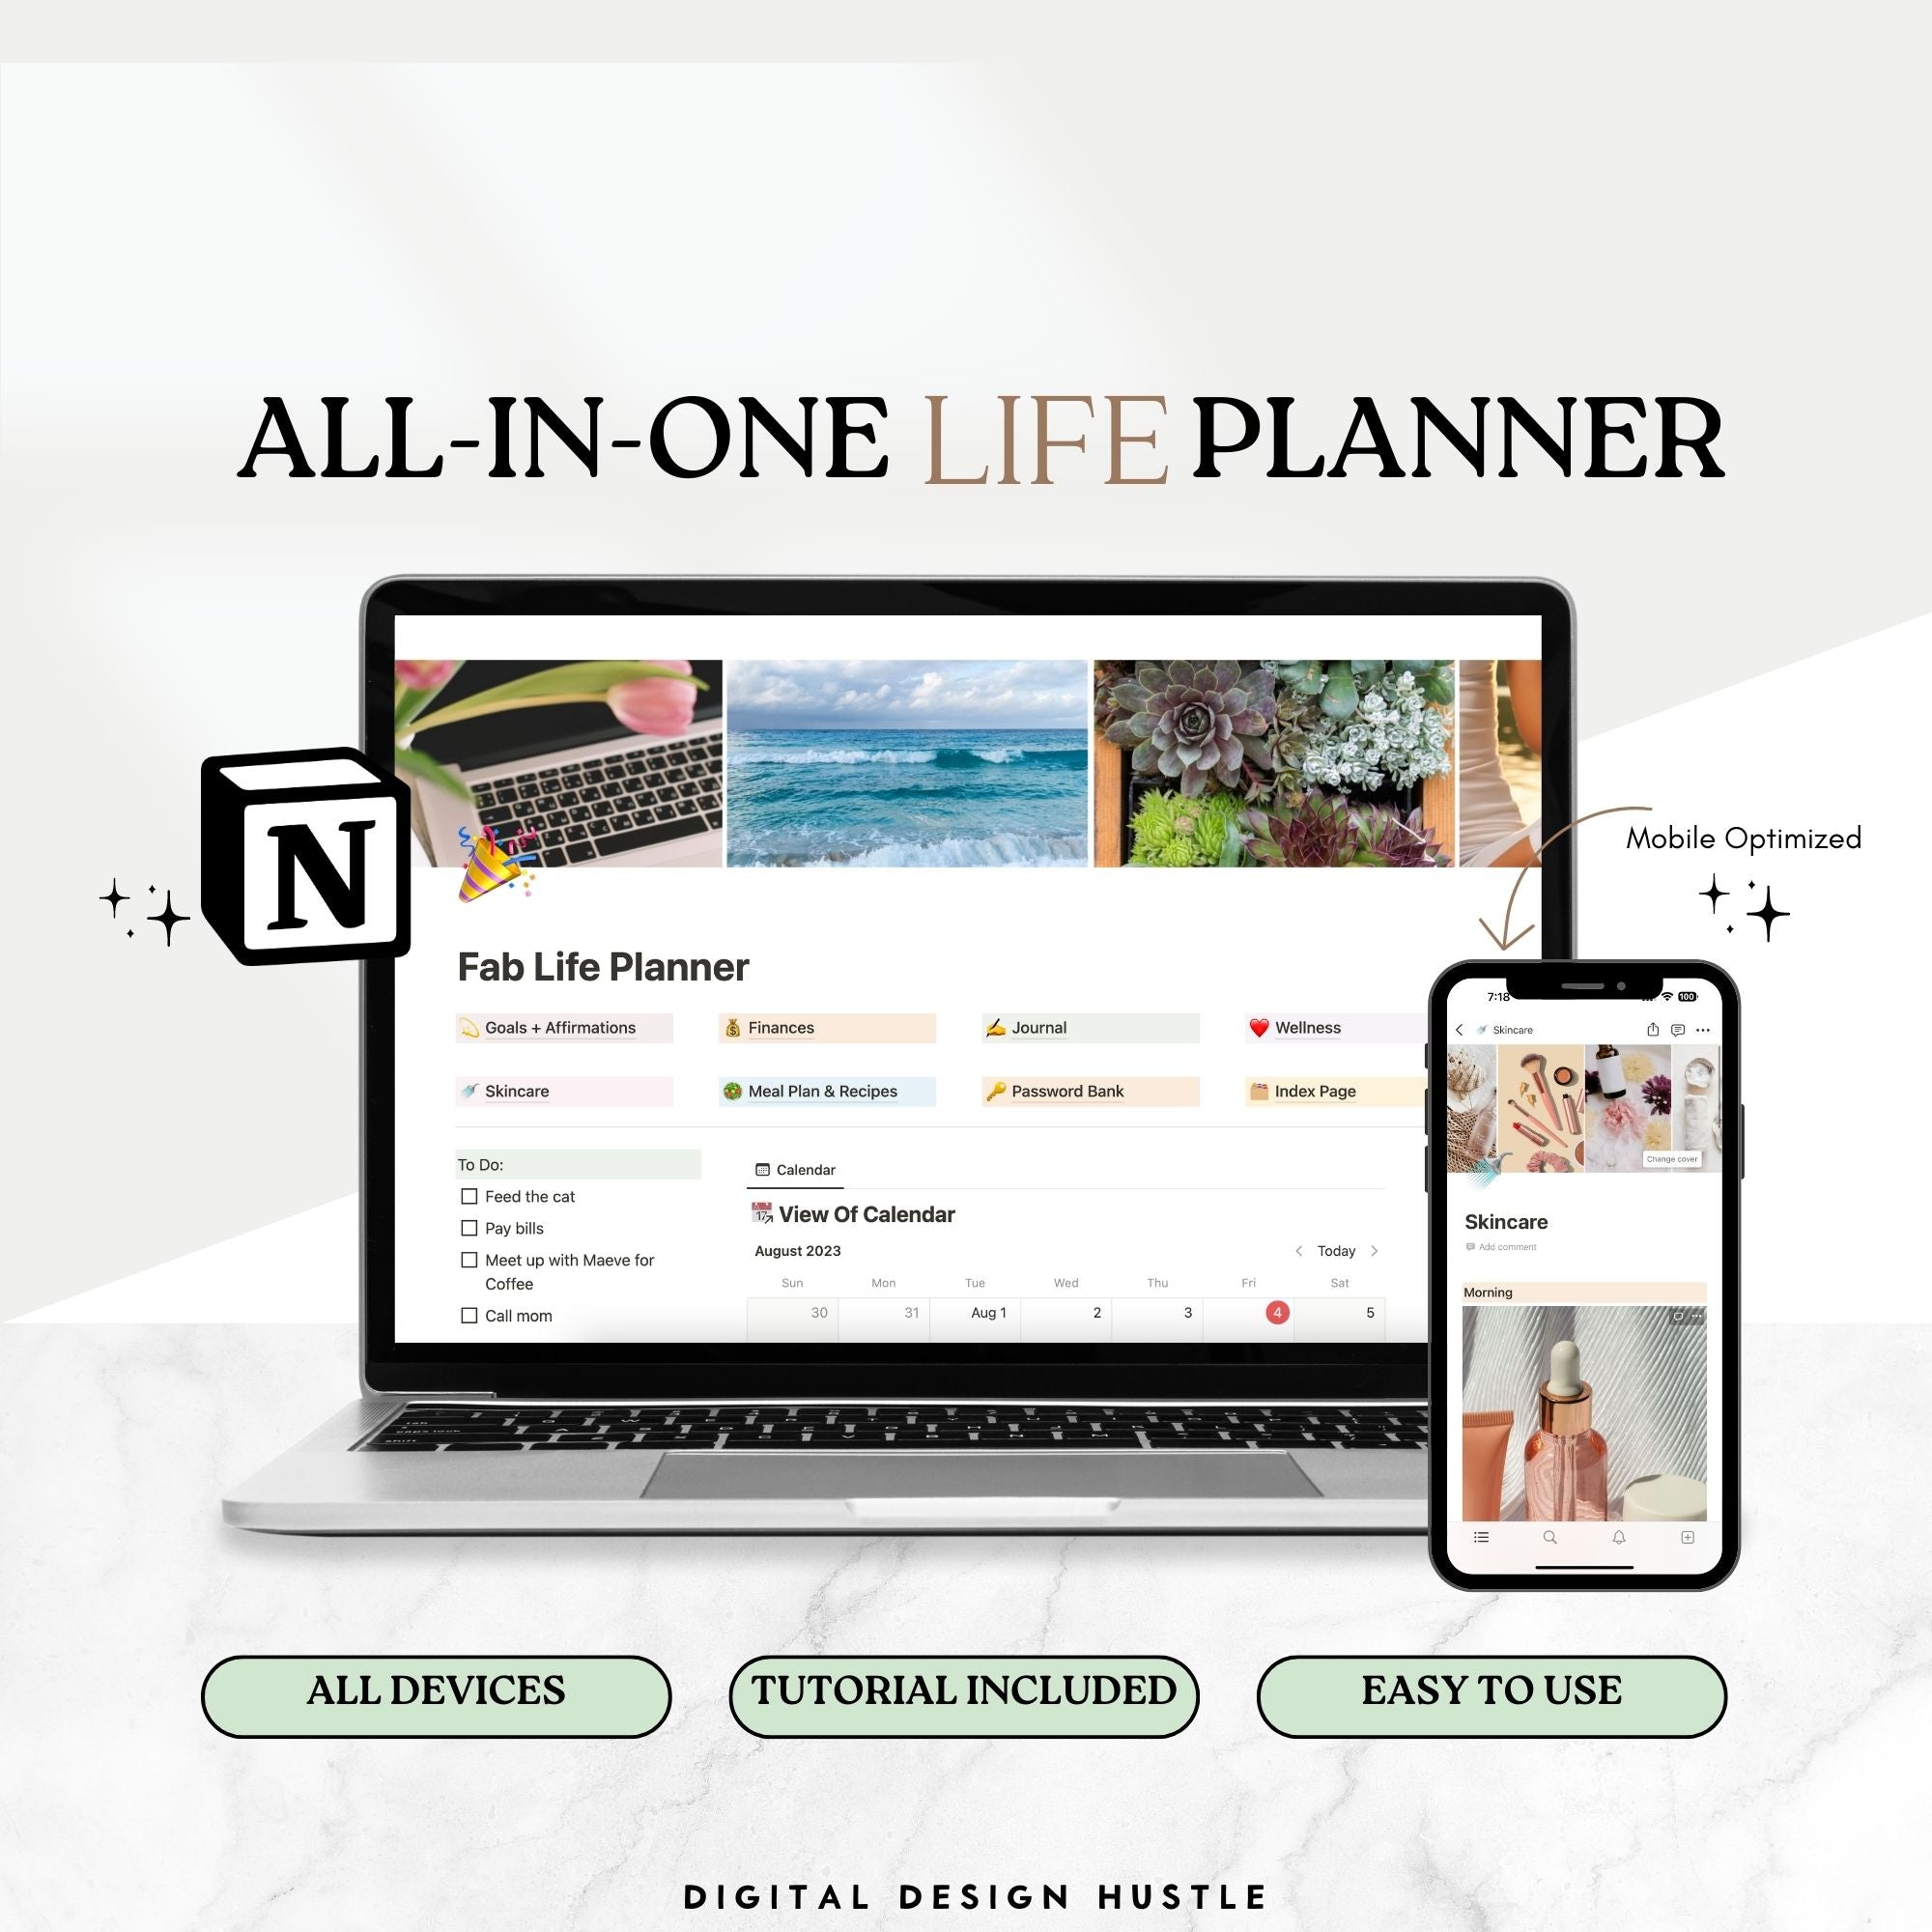 Introducing the Ultimate Notion Life Planner – Your All-in-One Solution for Mastering Life&